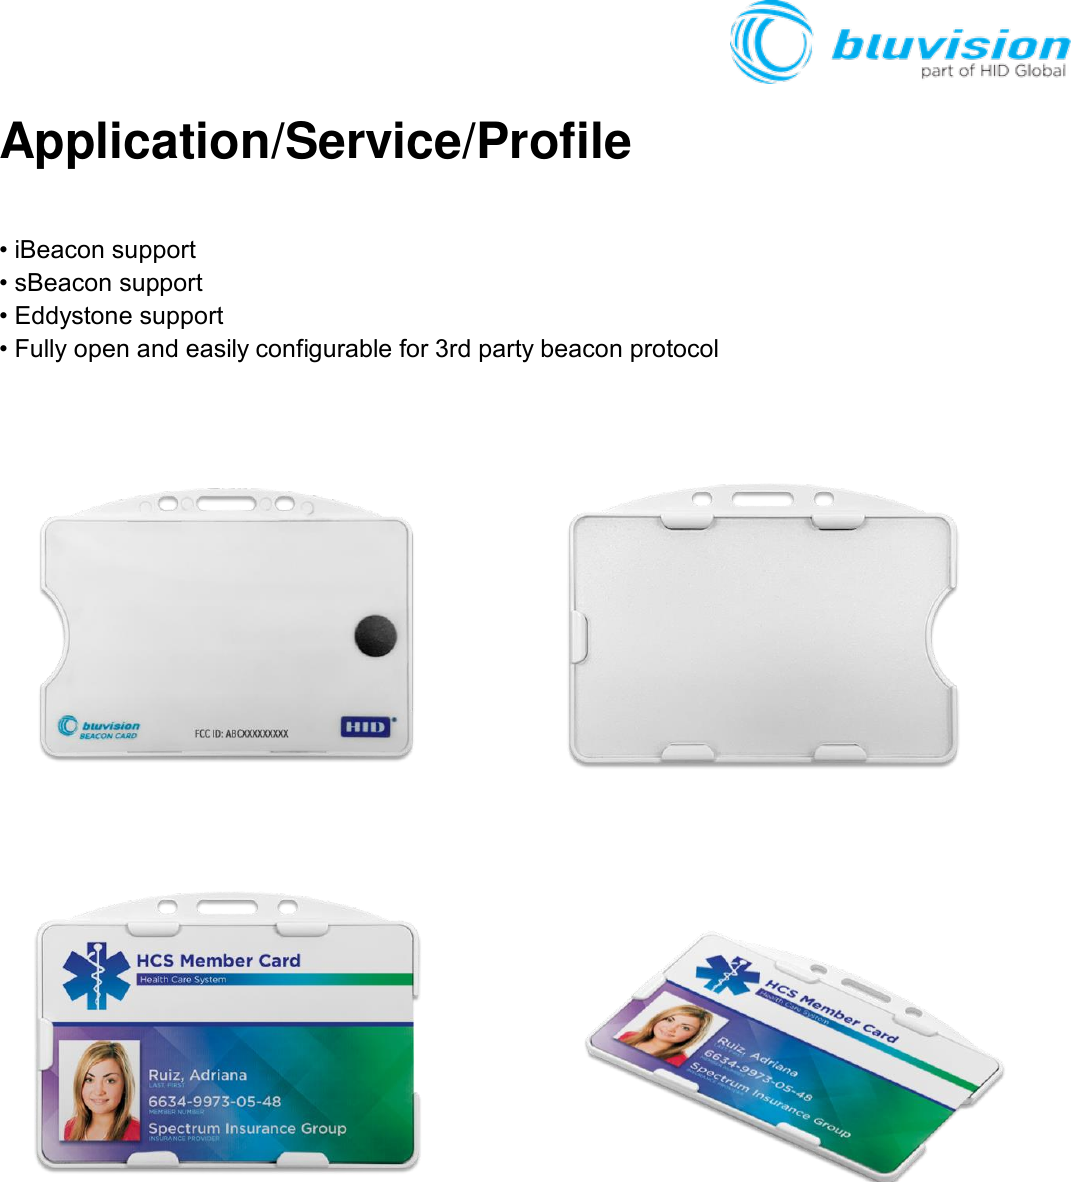   Application/Service/Profile  • iBeacon support • sBeacon support • Eddystone support • Fully open and easily configurable for 3rd party beacon protocol       